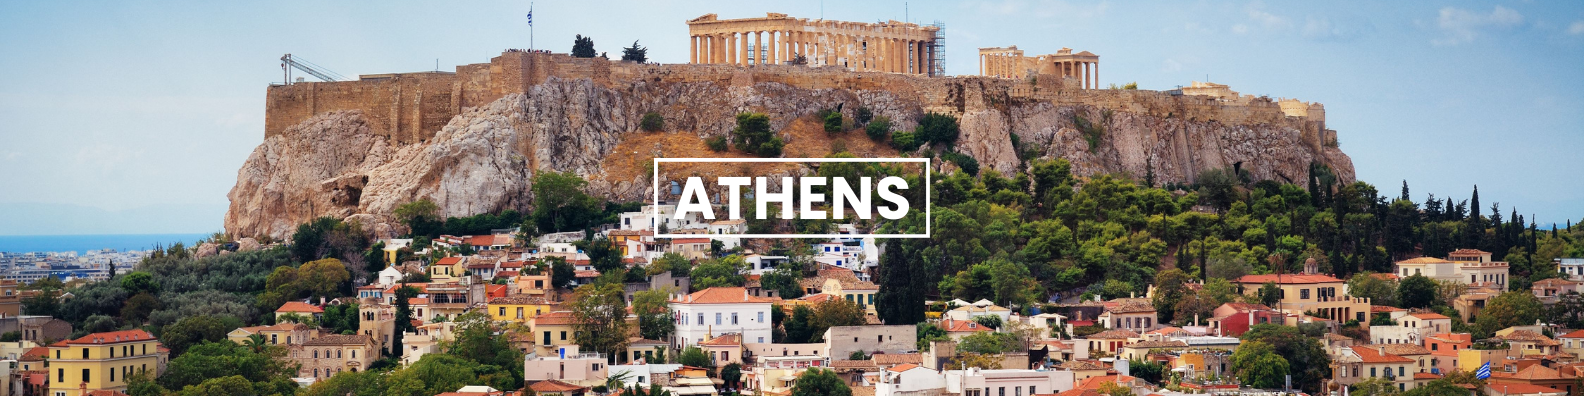 there is a castle on top of a hill in athens . Barter's Travelnet 